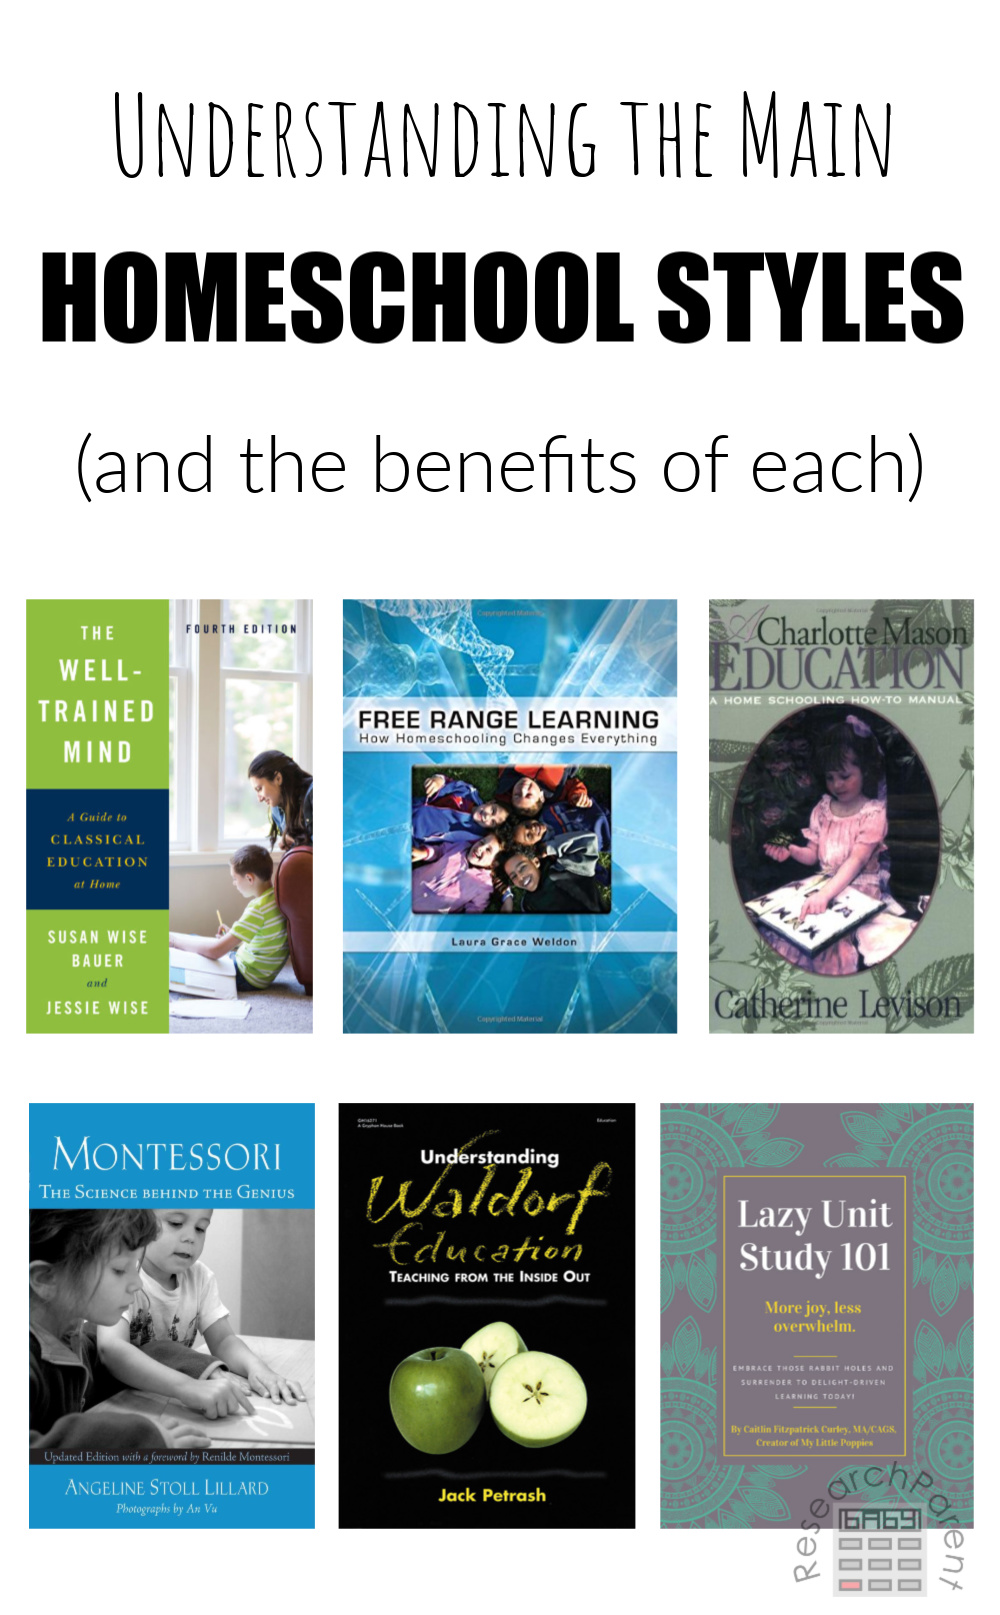 Homeschool Styles and the benefits of each